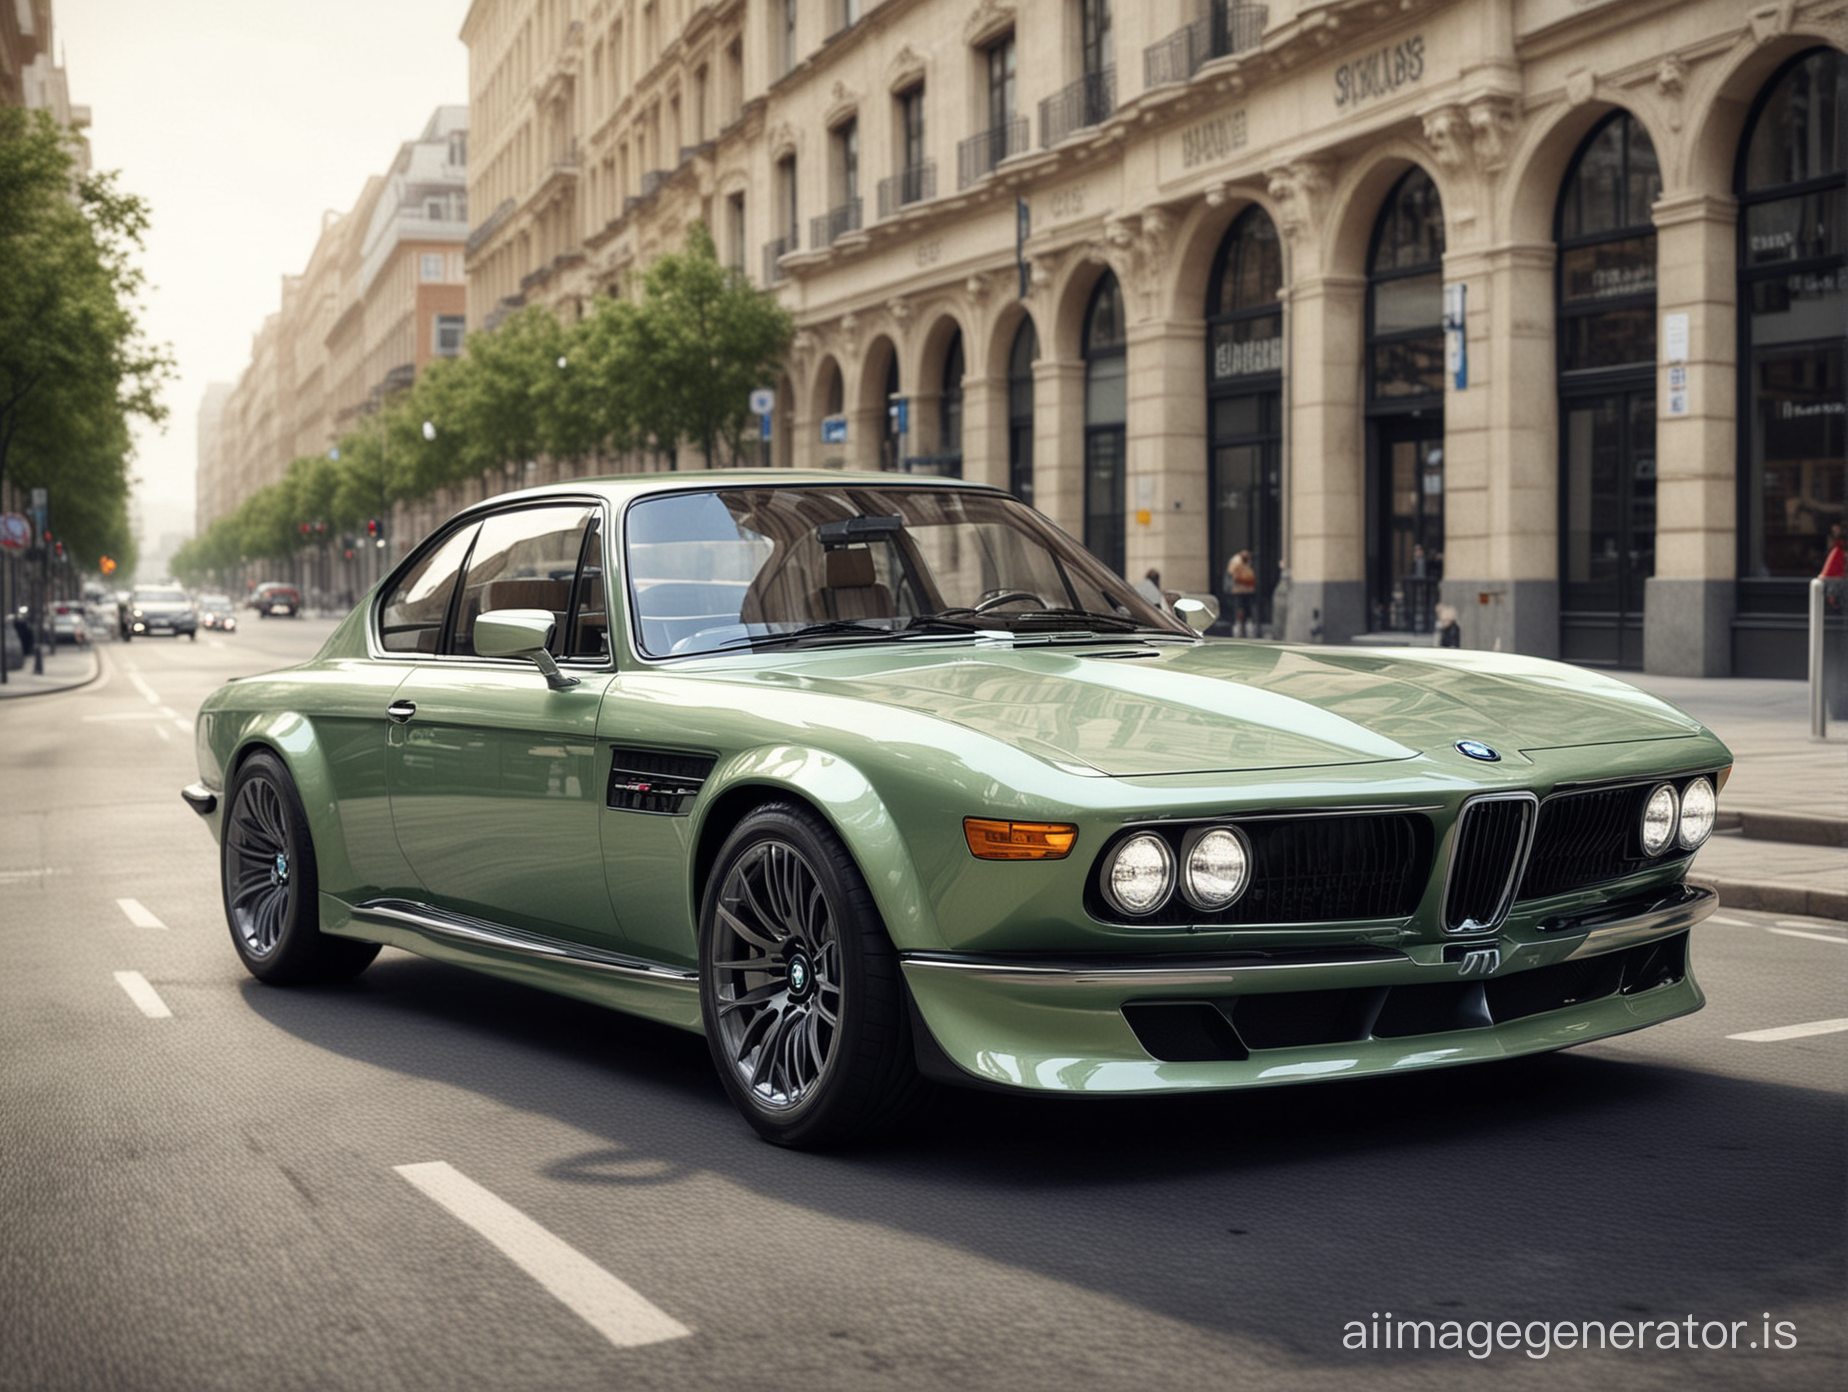 2024 version of the BMW 3.0 CSL. Modern city, lots of glass